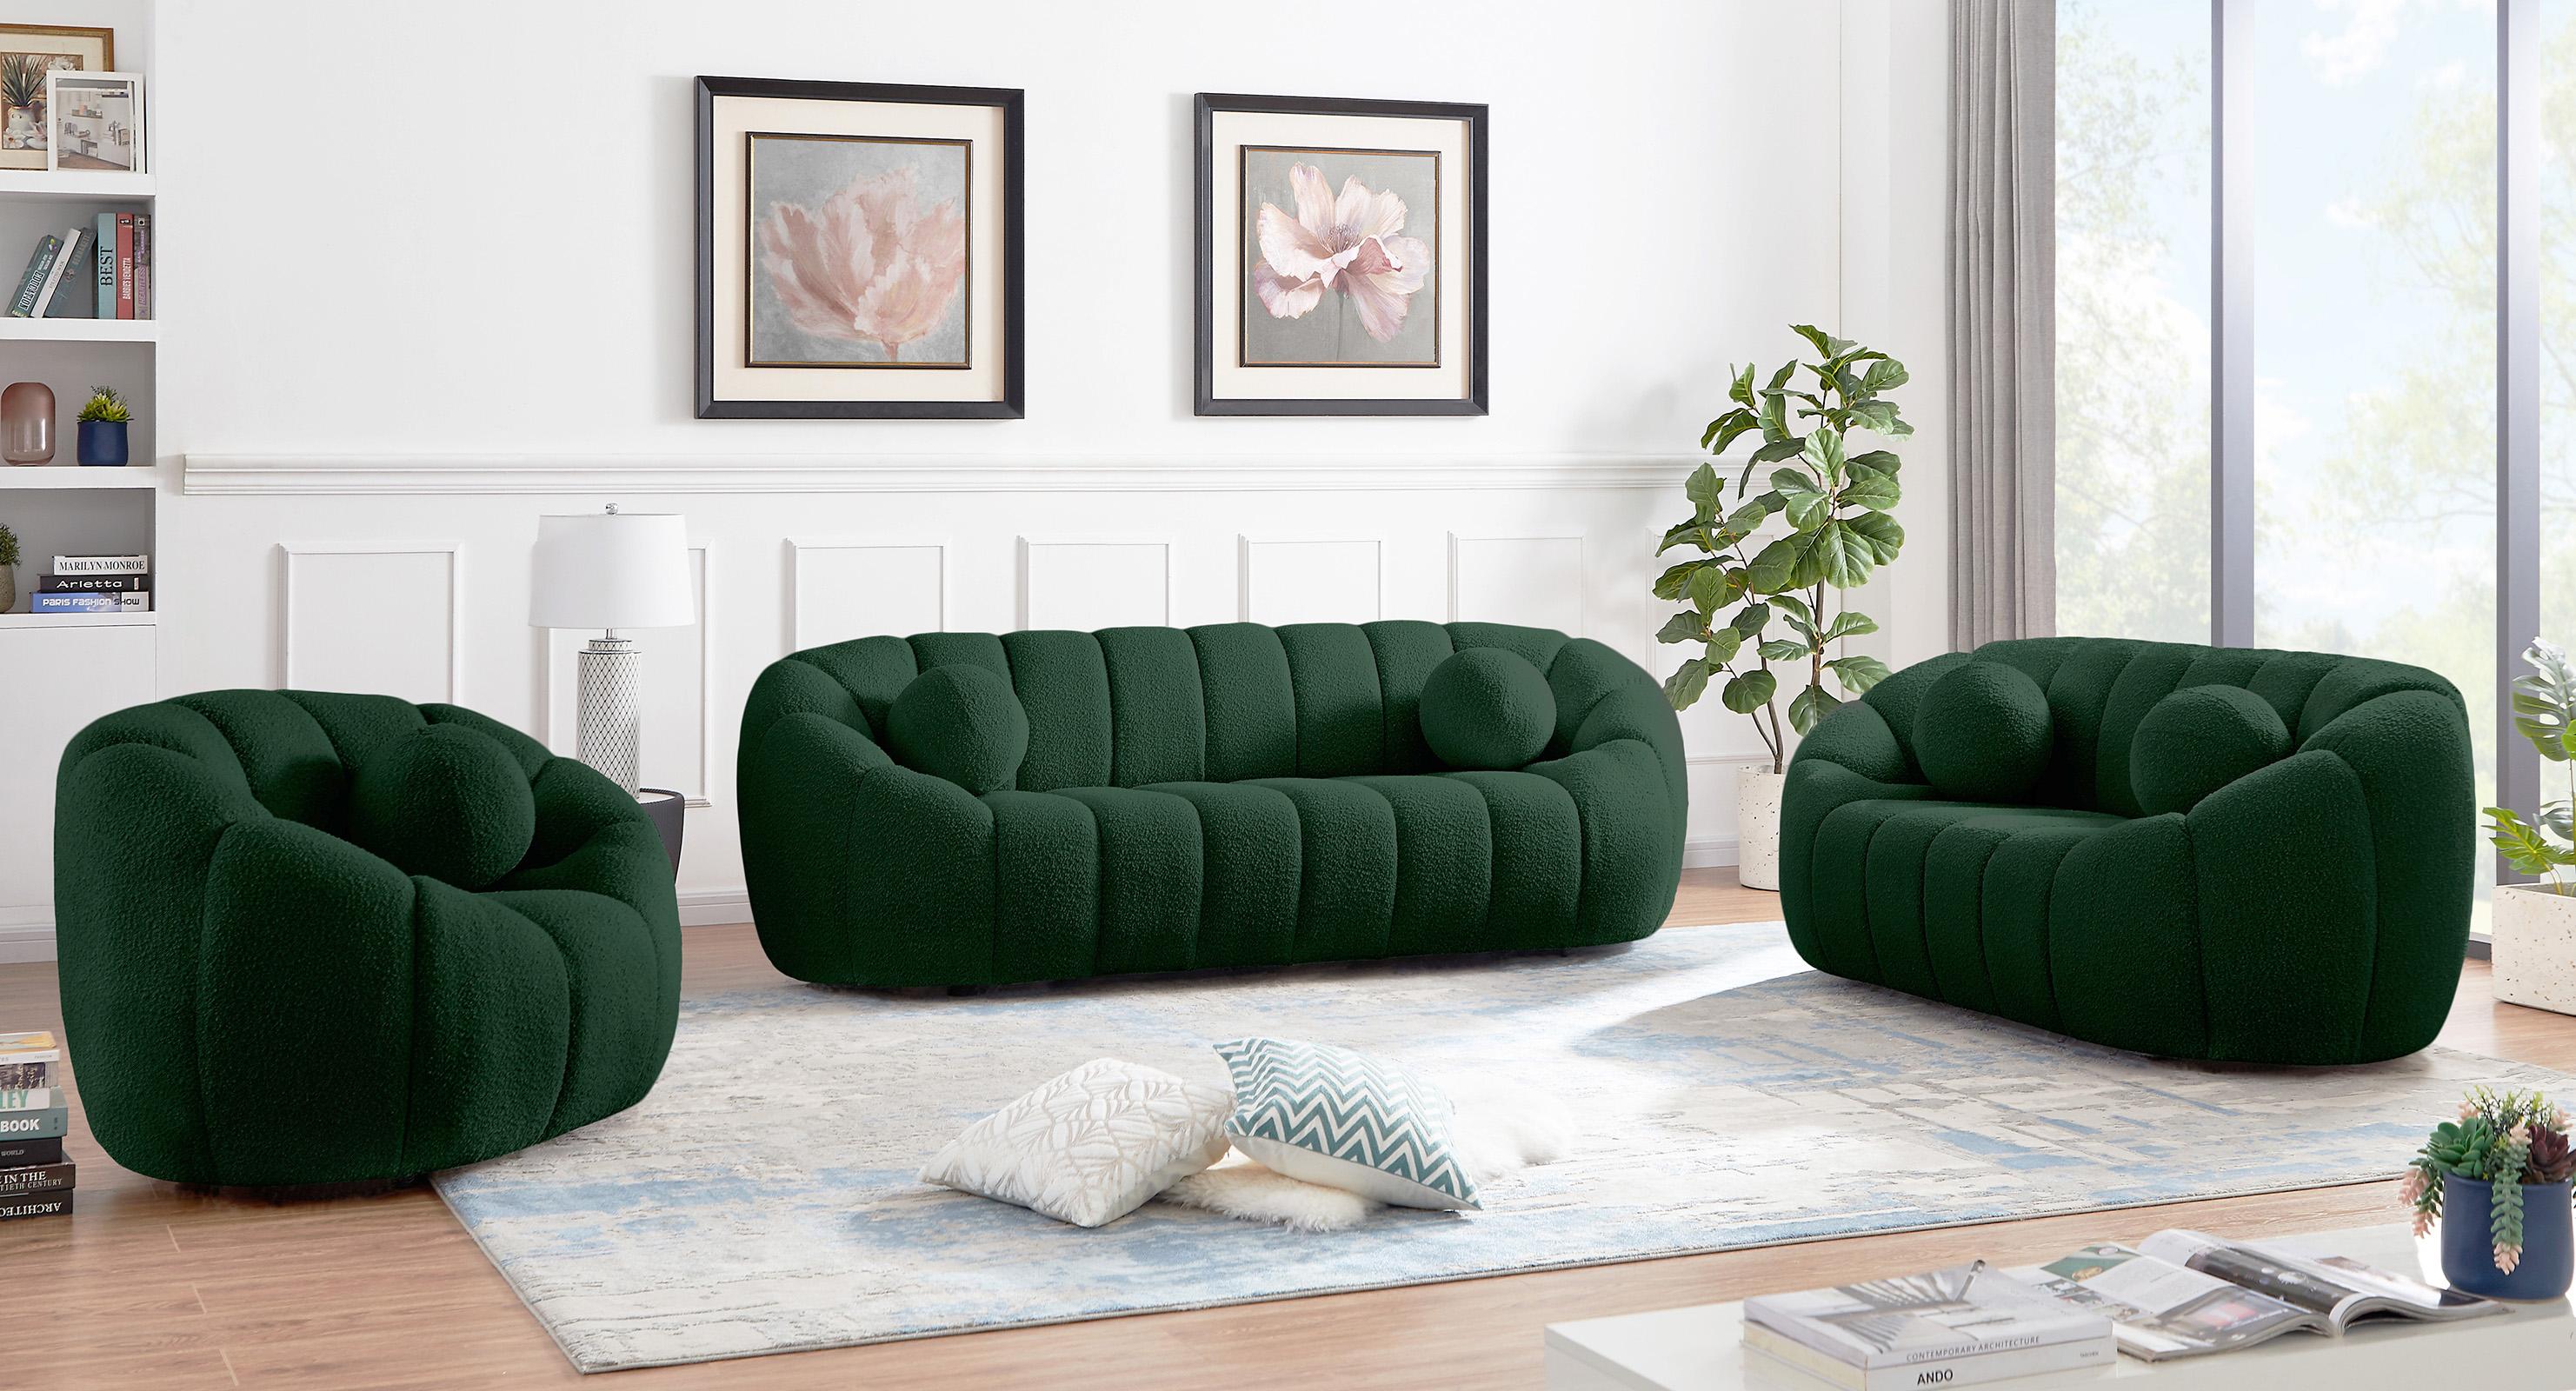 

    
644Green-C Glam Green Boucle Channel Tufted Chair ELIJAH 644Green-C Meridian Modern
